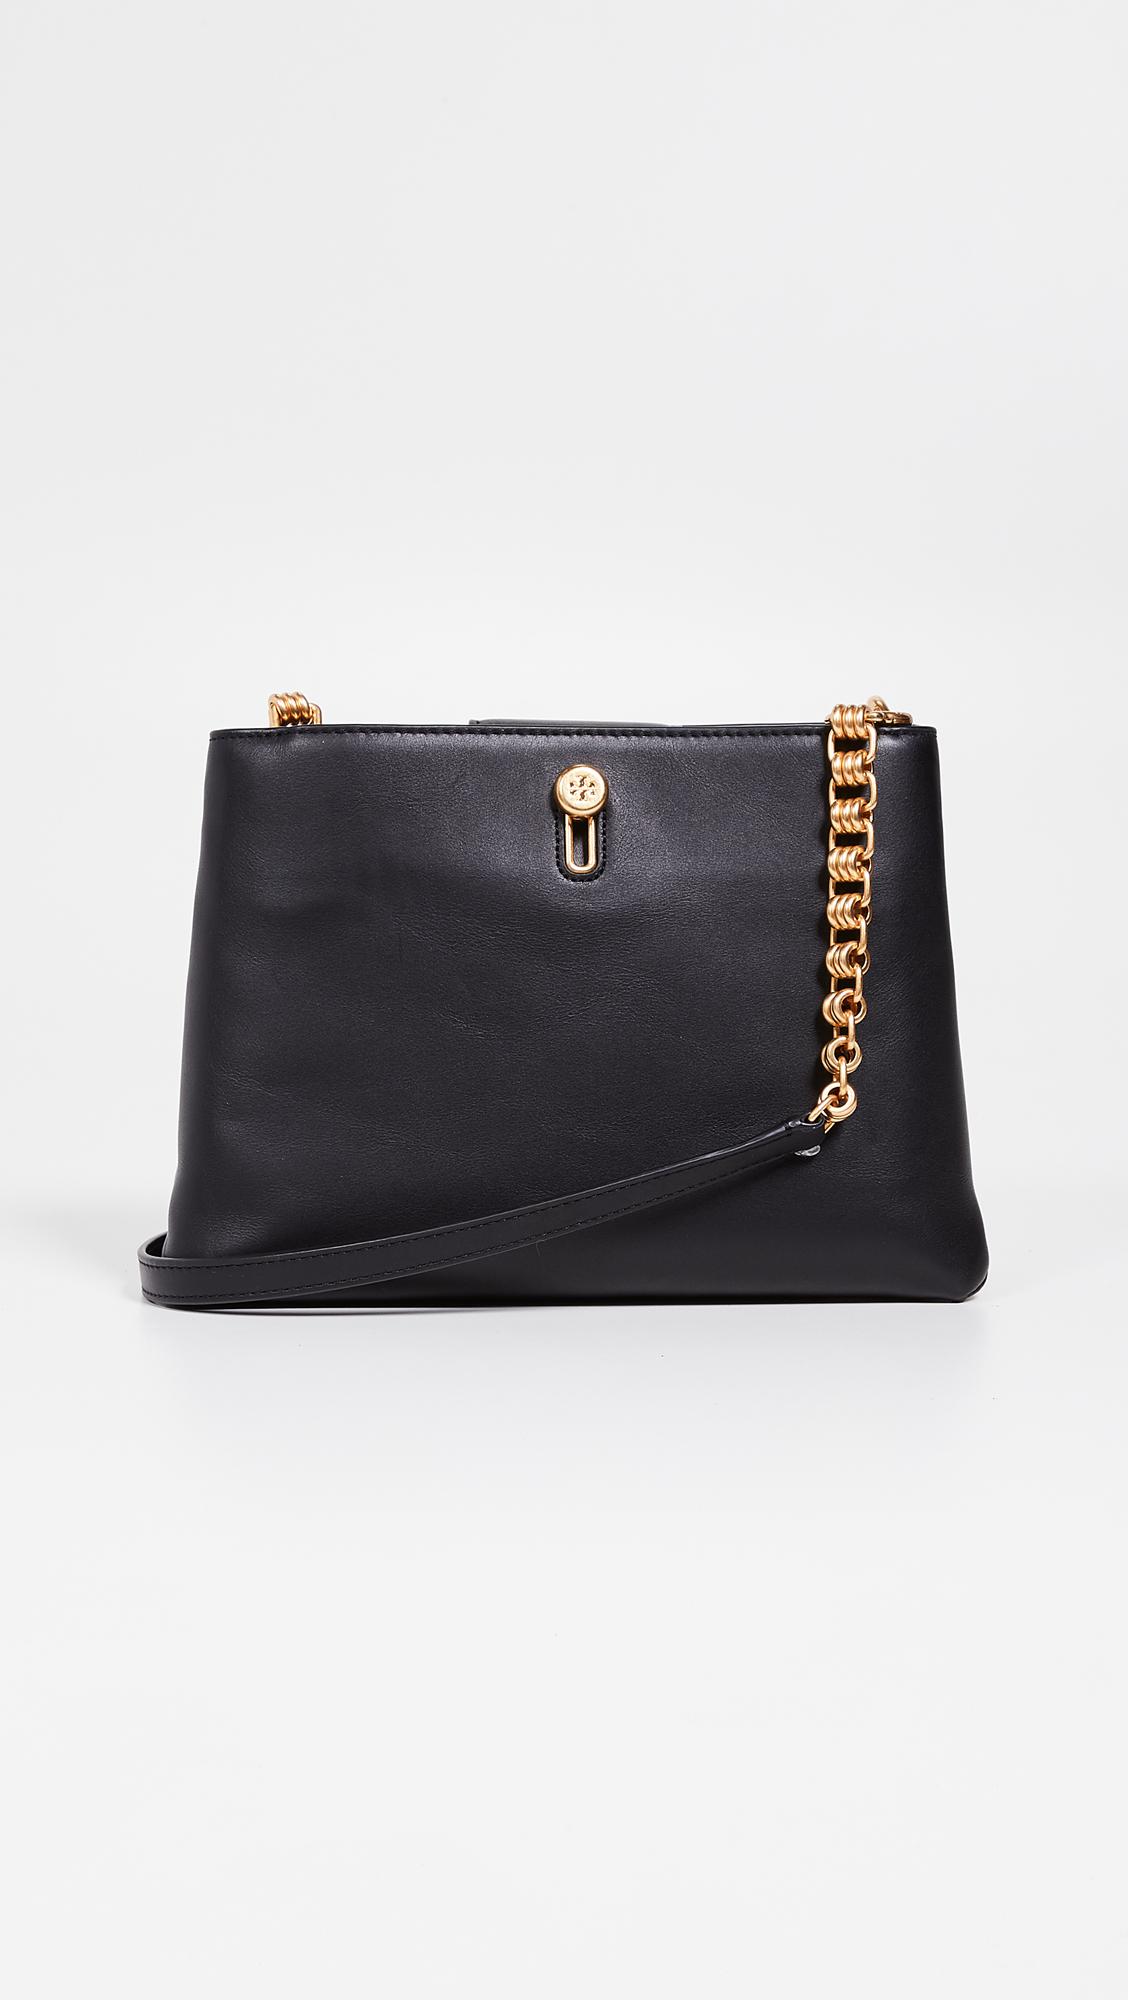 Tory Burch Leather Lily Chain Crossbody Bag in Black - Lyst